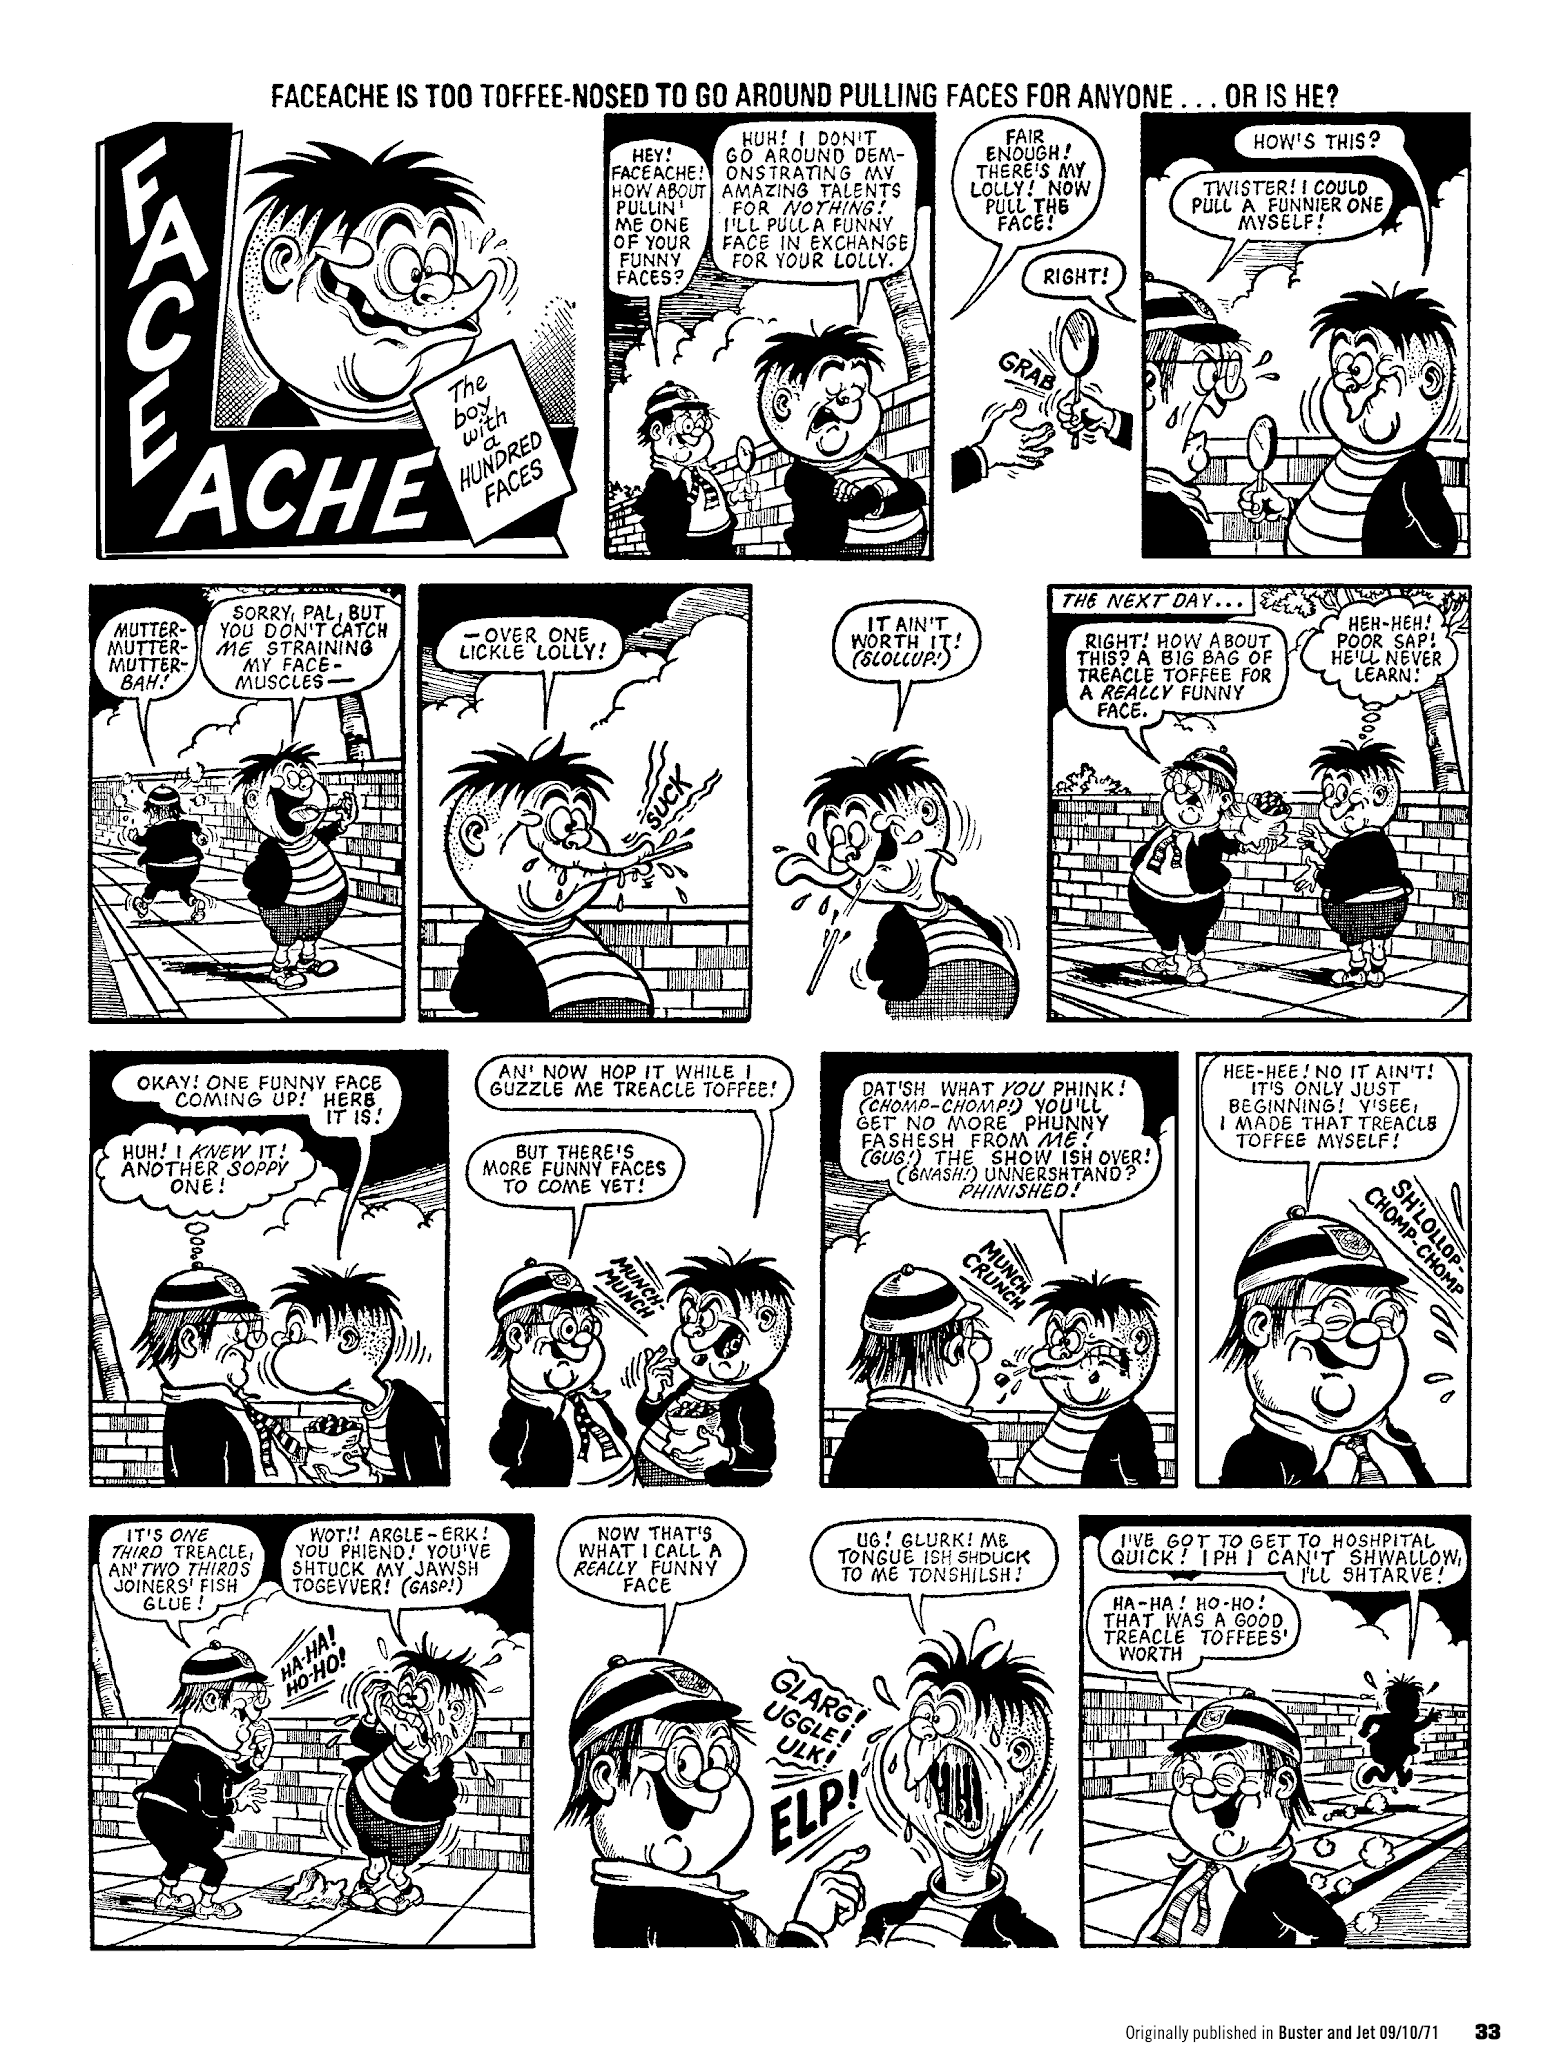 Read online Faceache: The First Hundred Scrunges comic -  Issue # TPB 1 - 35